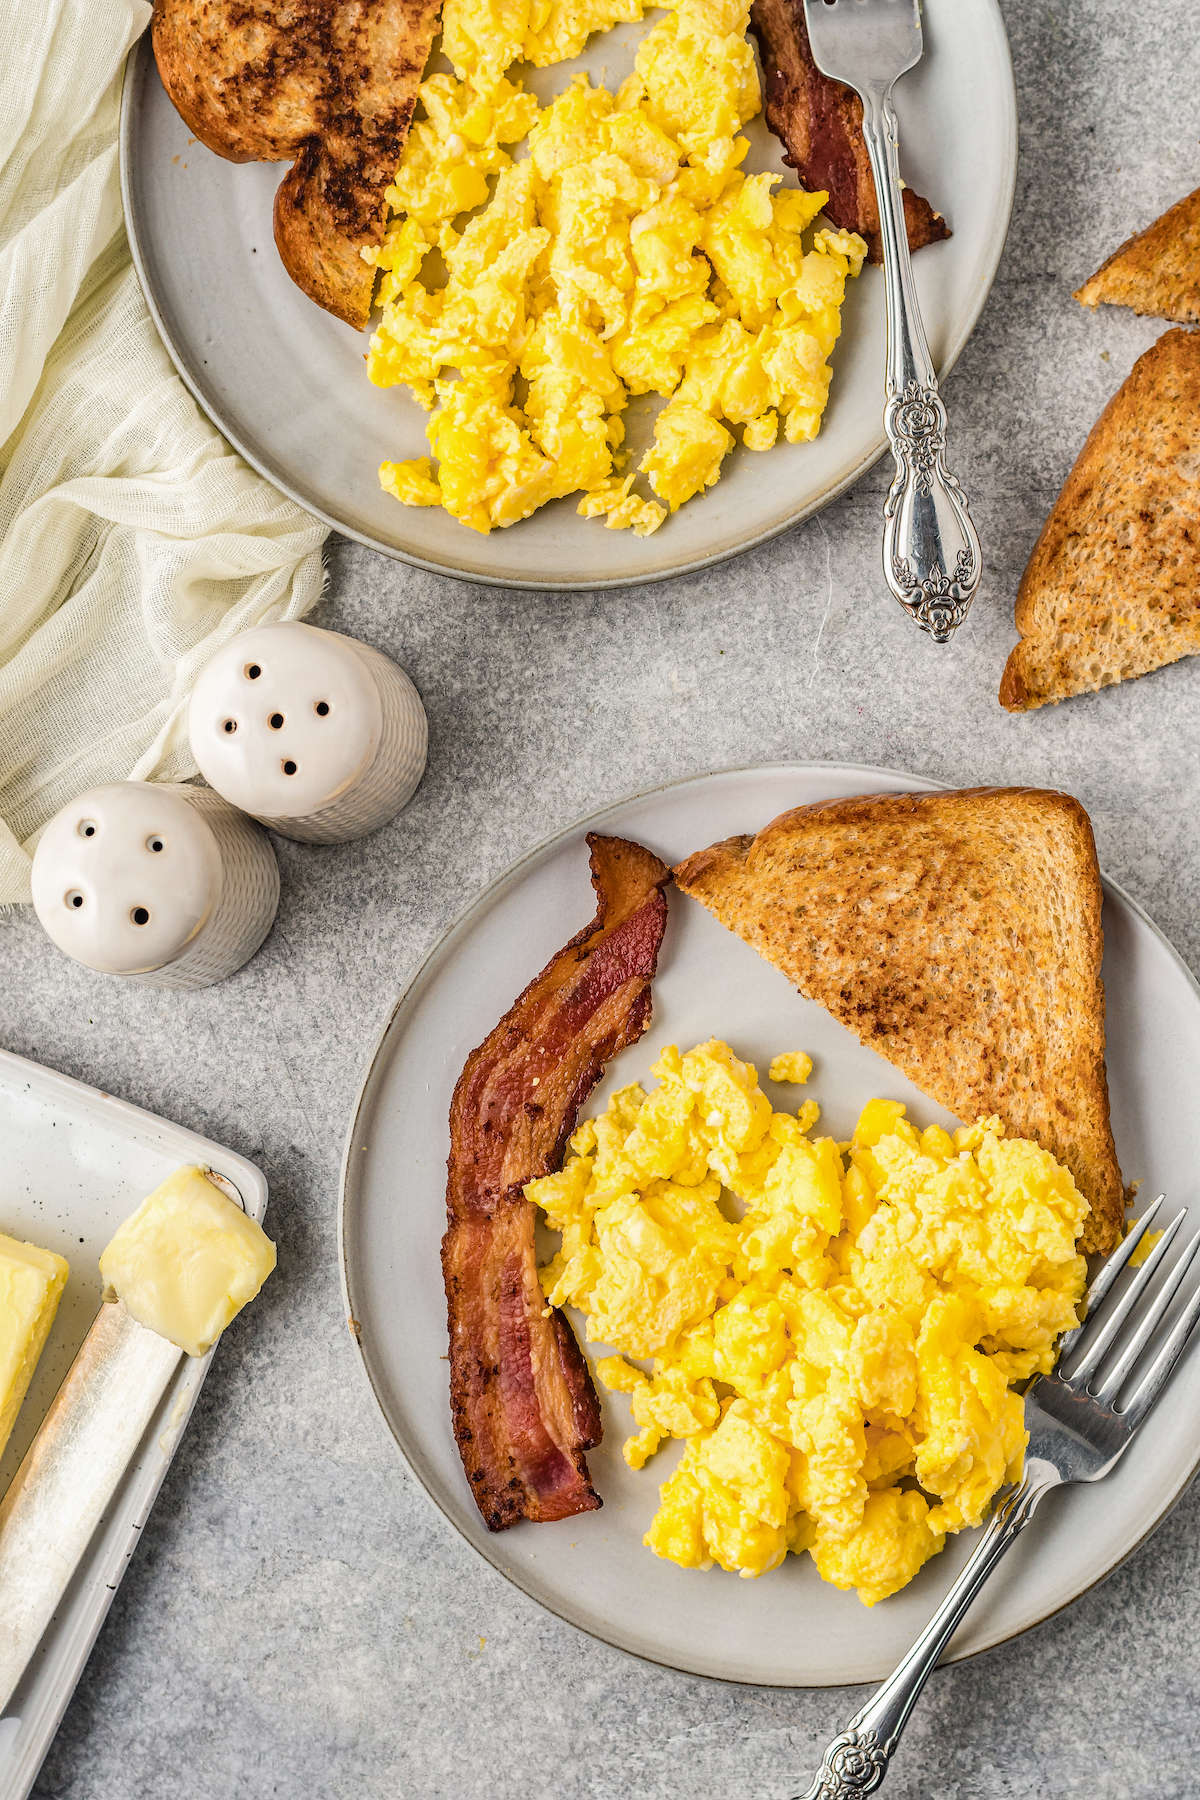 A breakfast spread of scrambled eggs on plates, next to toast and bacon.